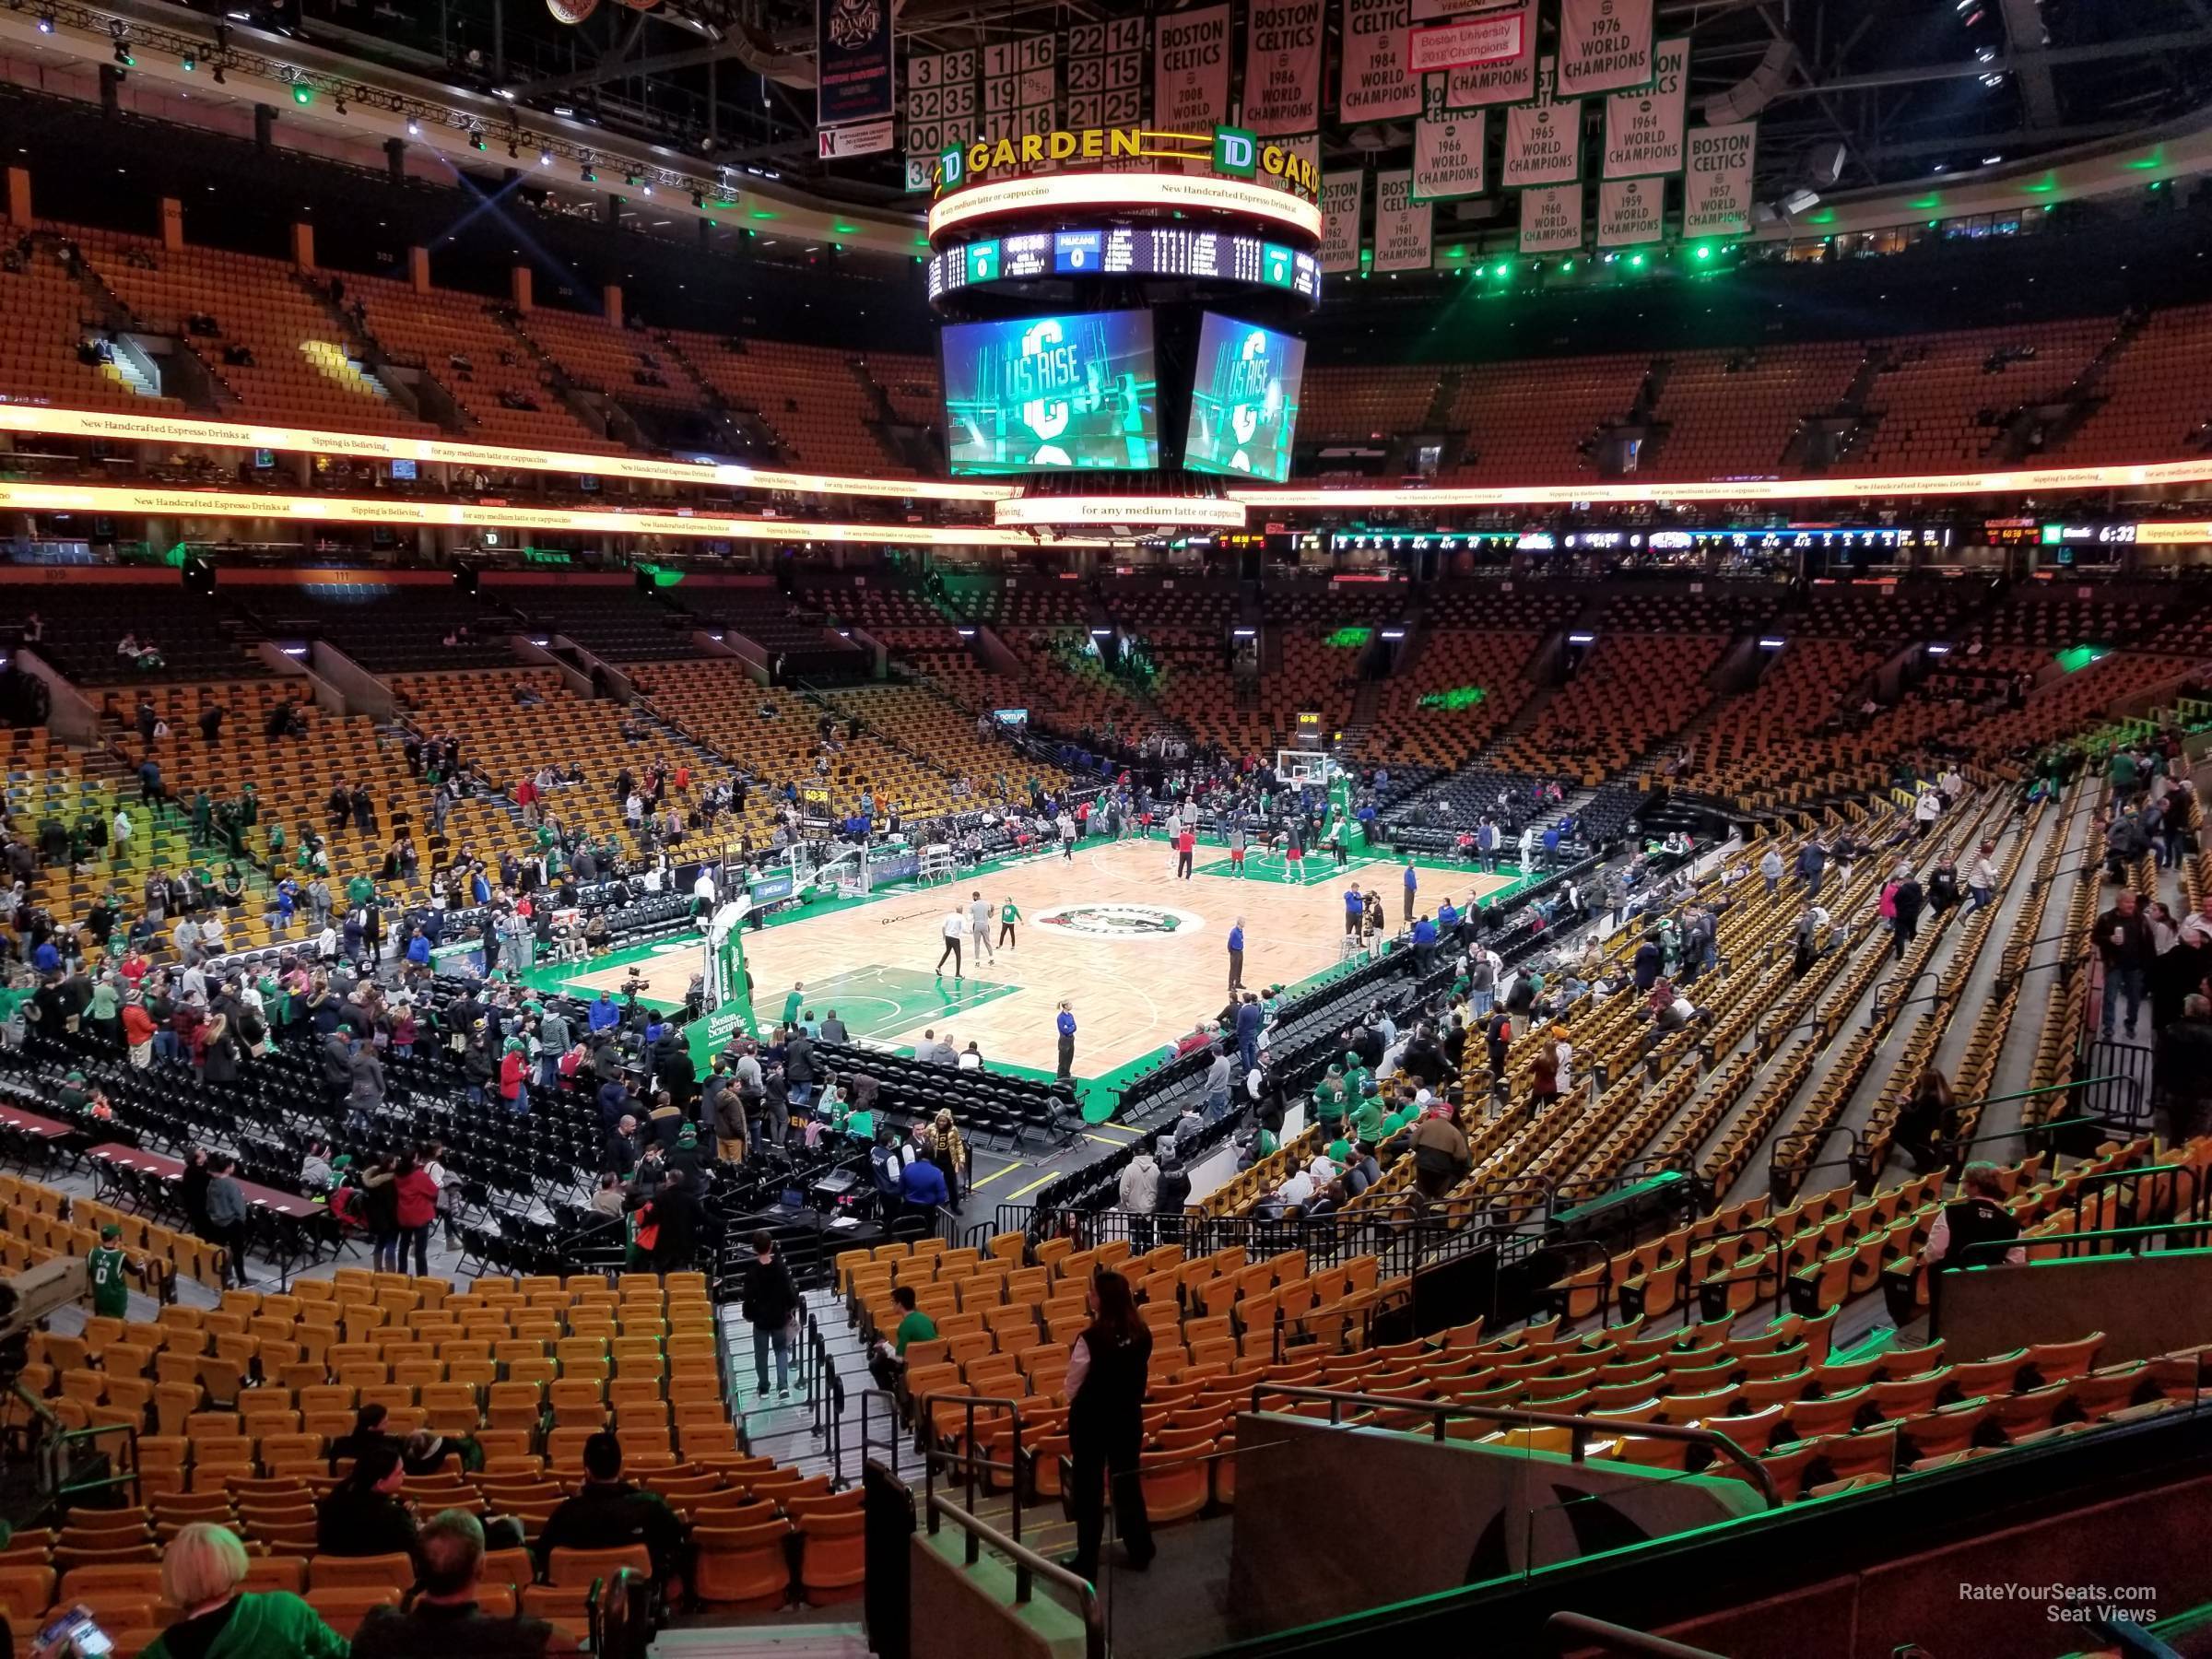 loge 16, row 26 seat view  for basketball - td garden